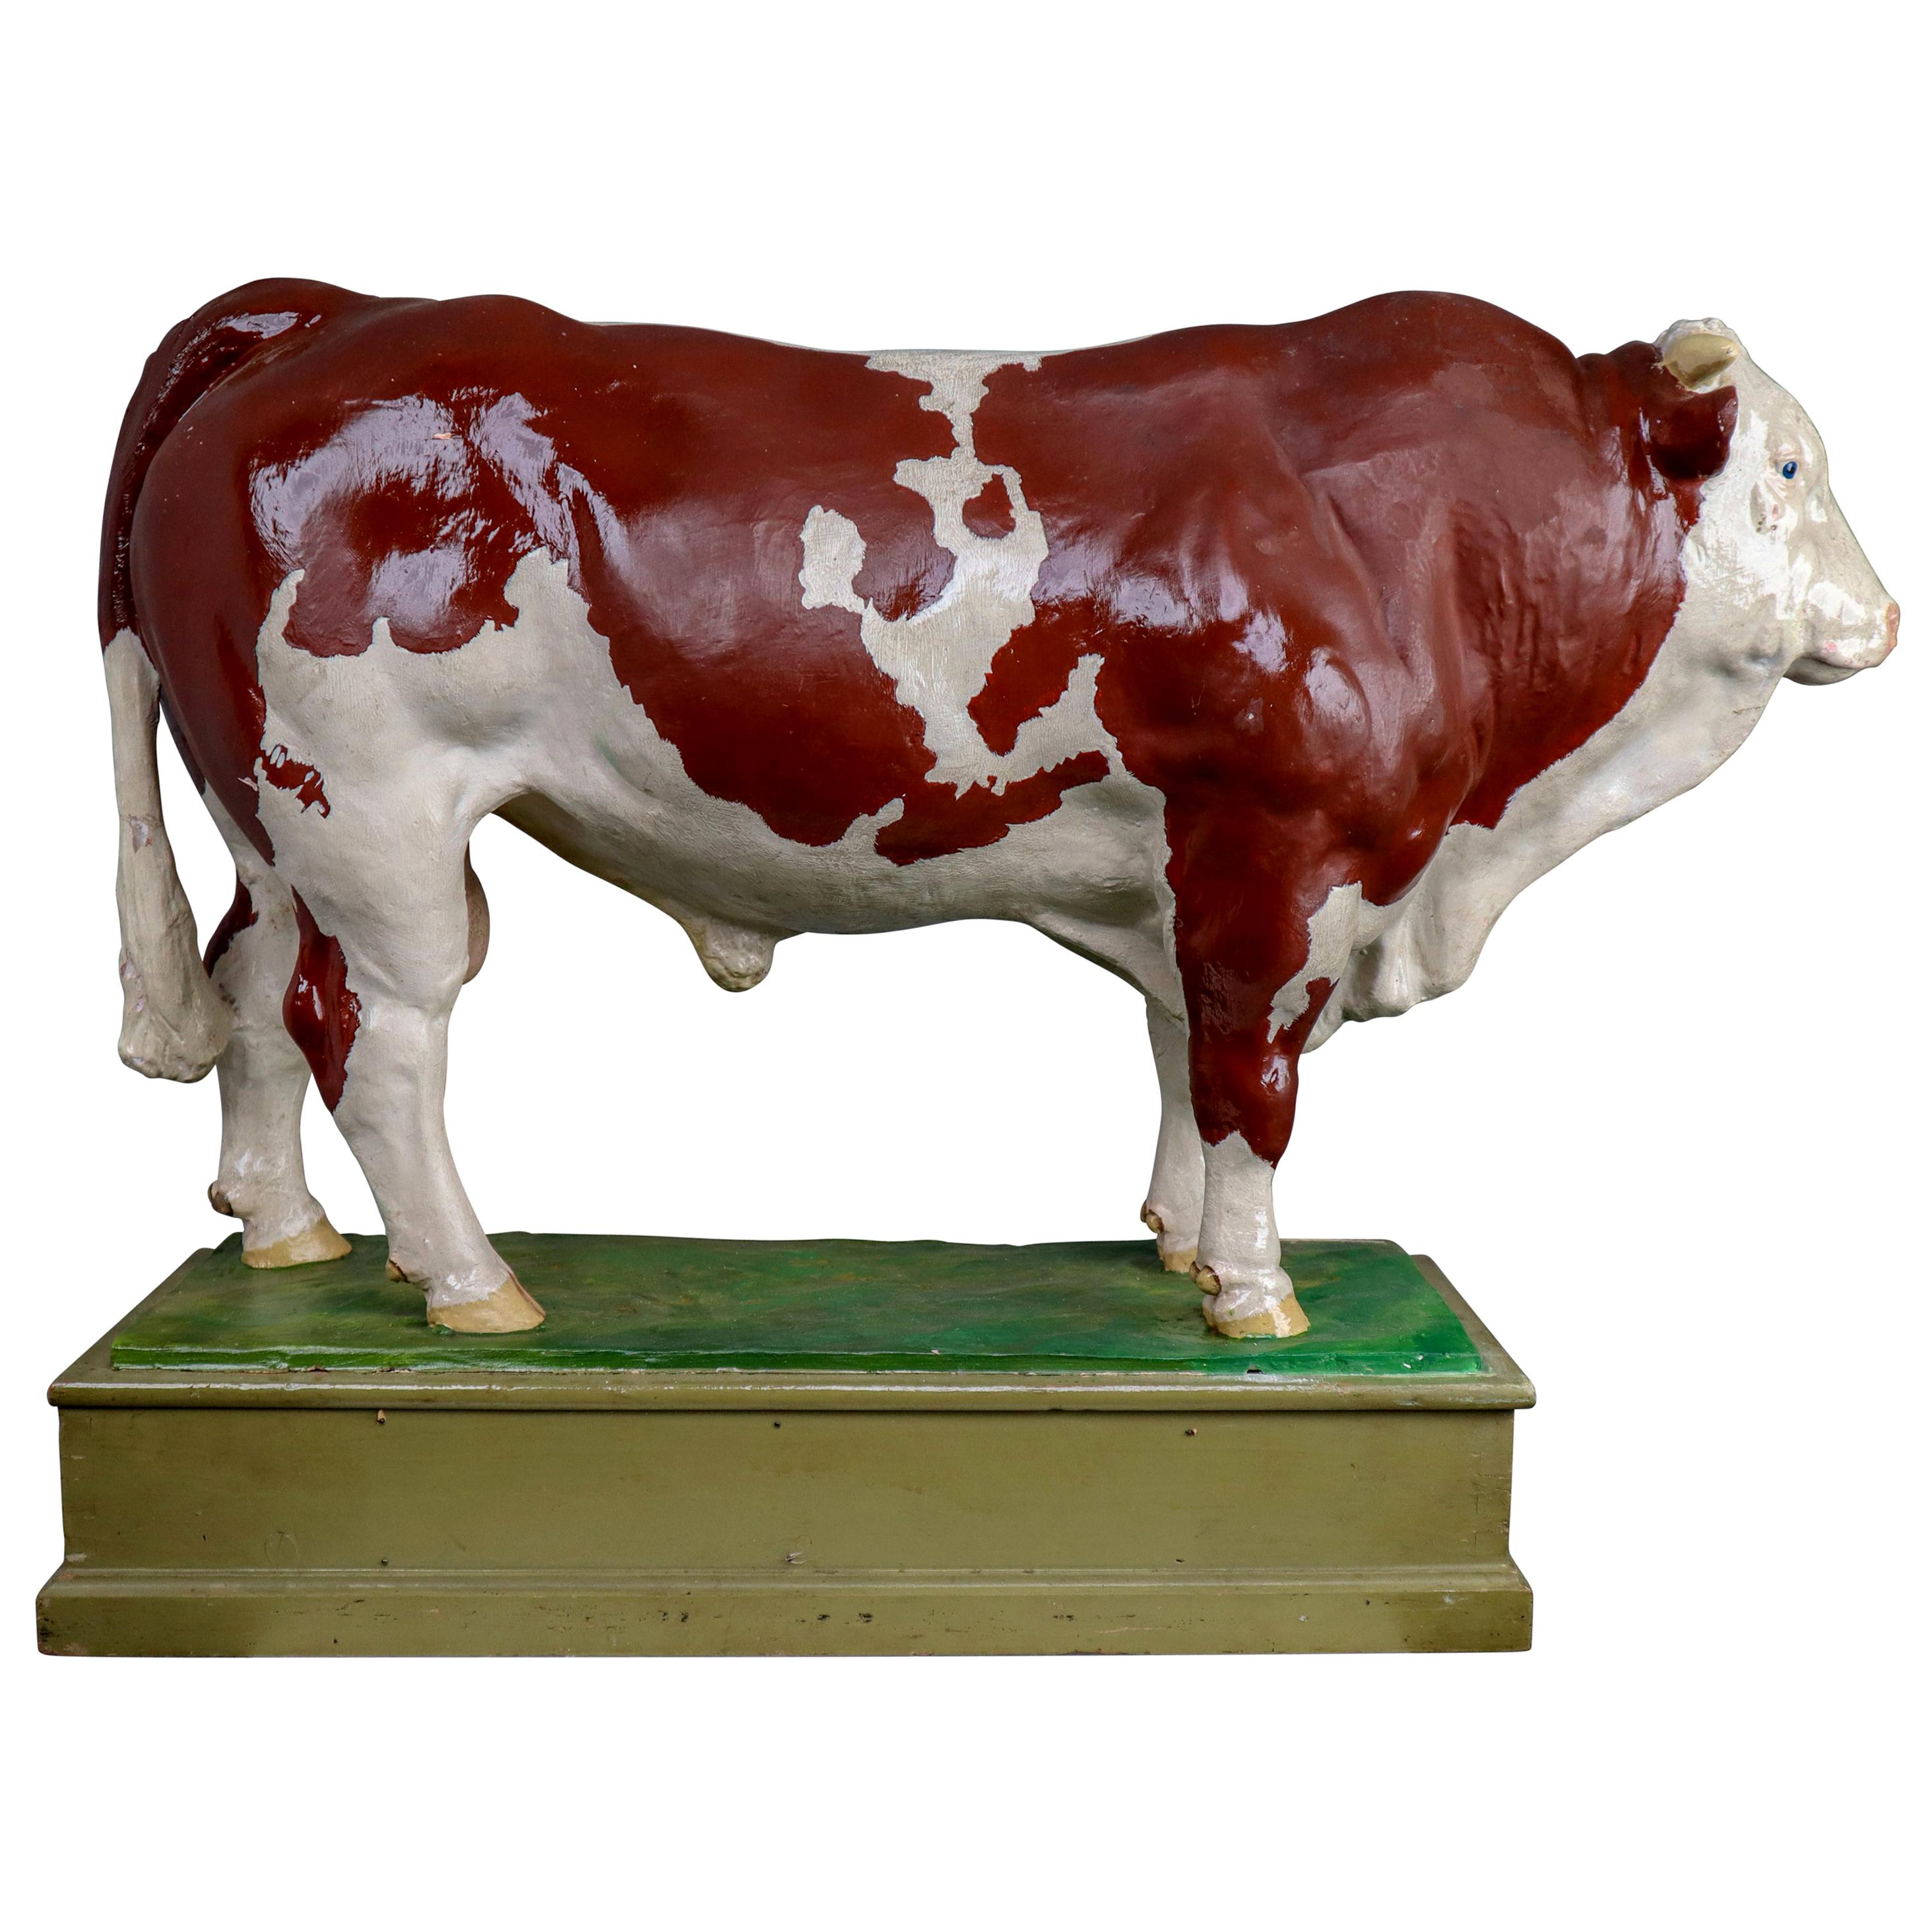 Early 20th Century Hand Painted Plaster Model of a Bull Made in Czech Republic